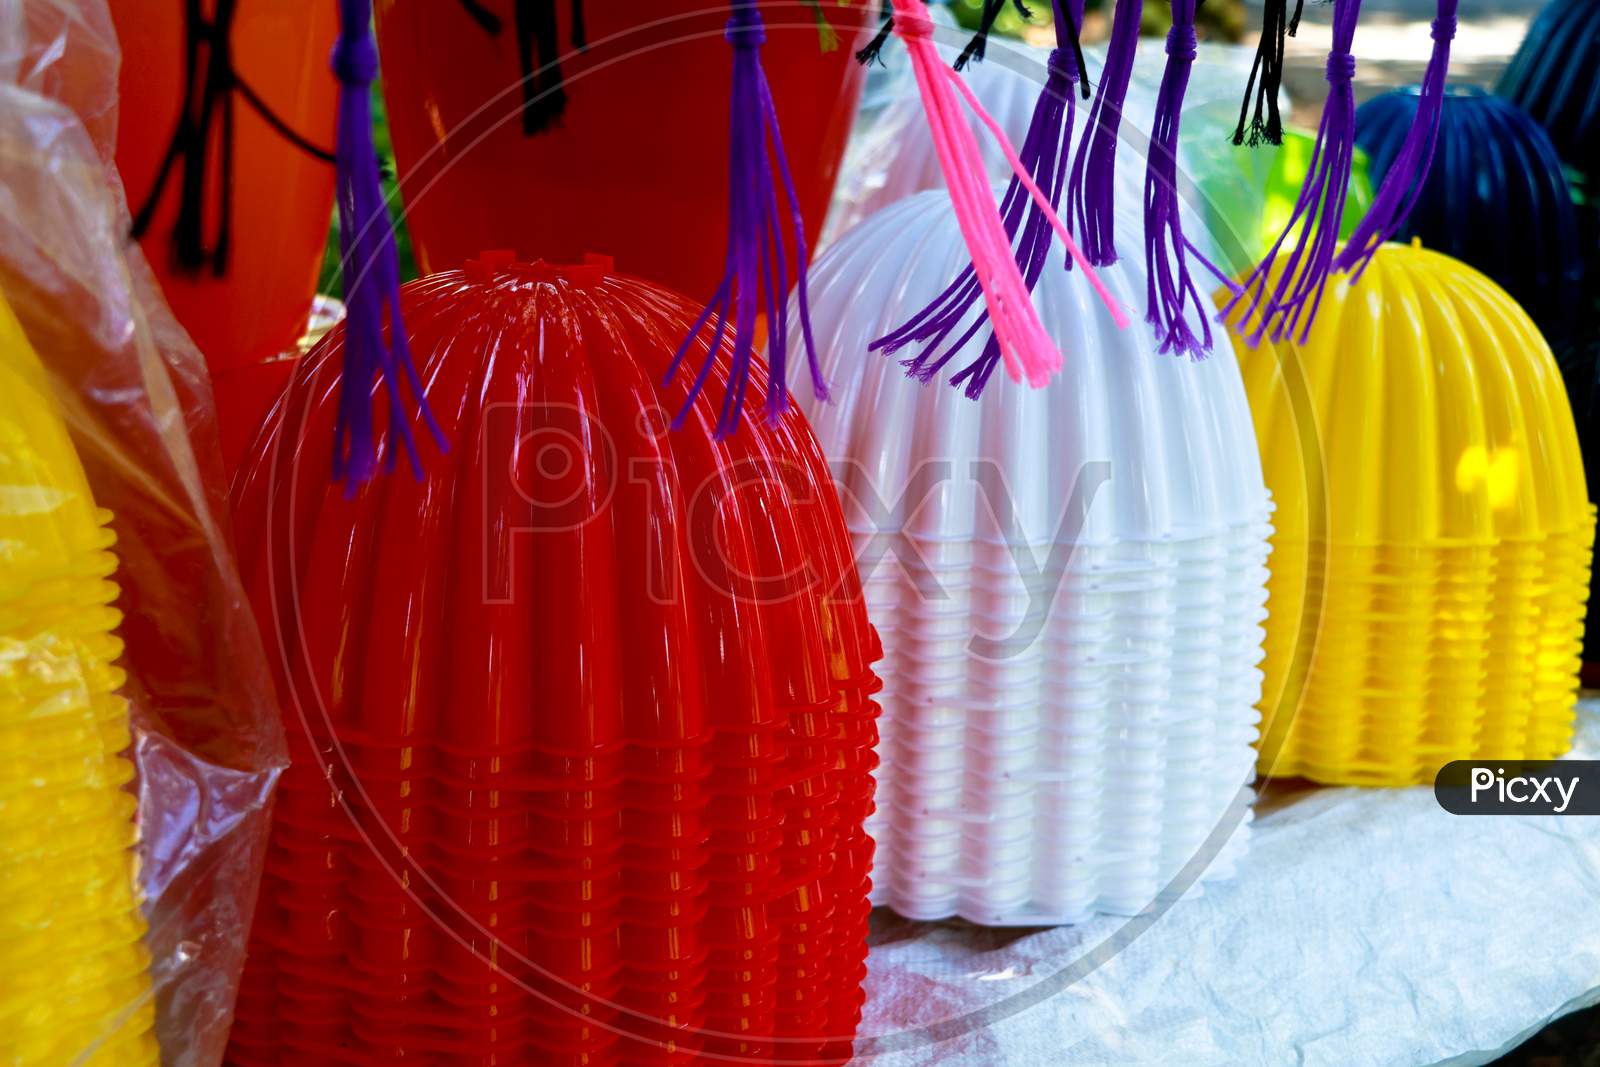 Plastic Flower Vases In Different Colors For Sale On The Roadside